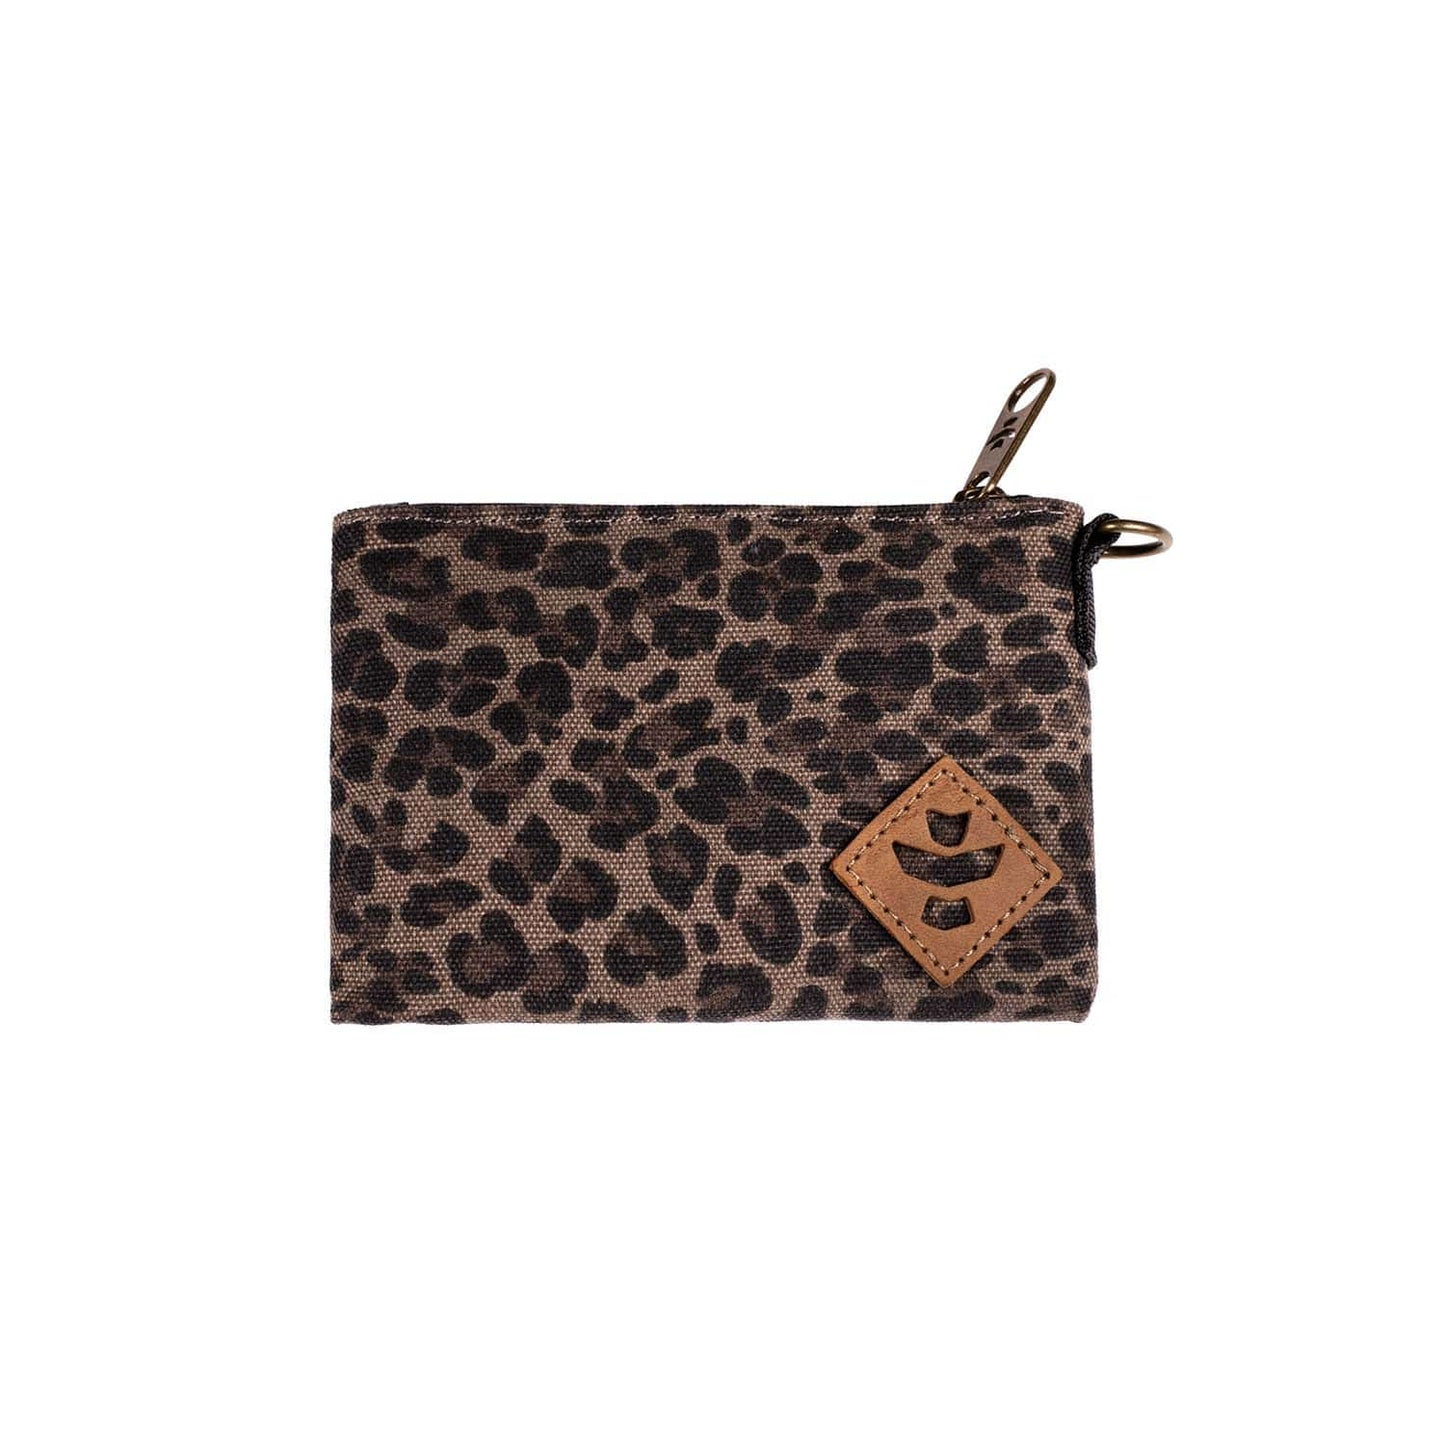 Revelry Supply Travel Bag Leopard The Mini Broker - Smell Proof Zippered Small Stash Bag